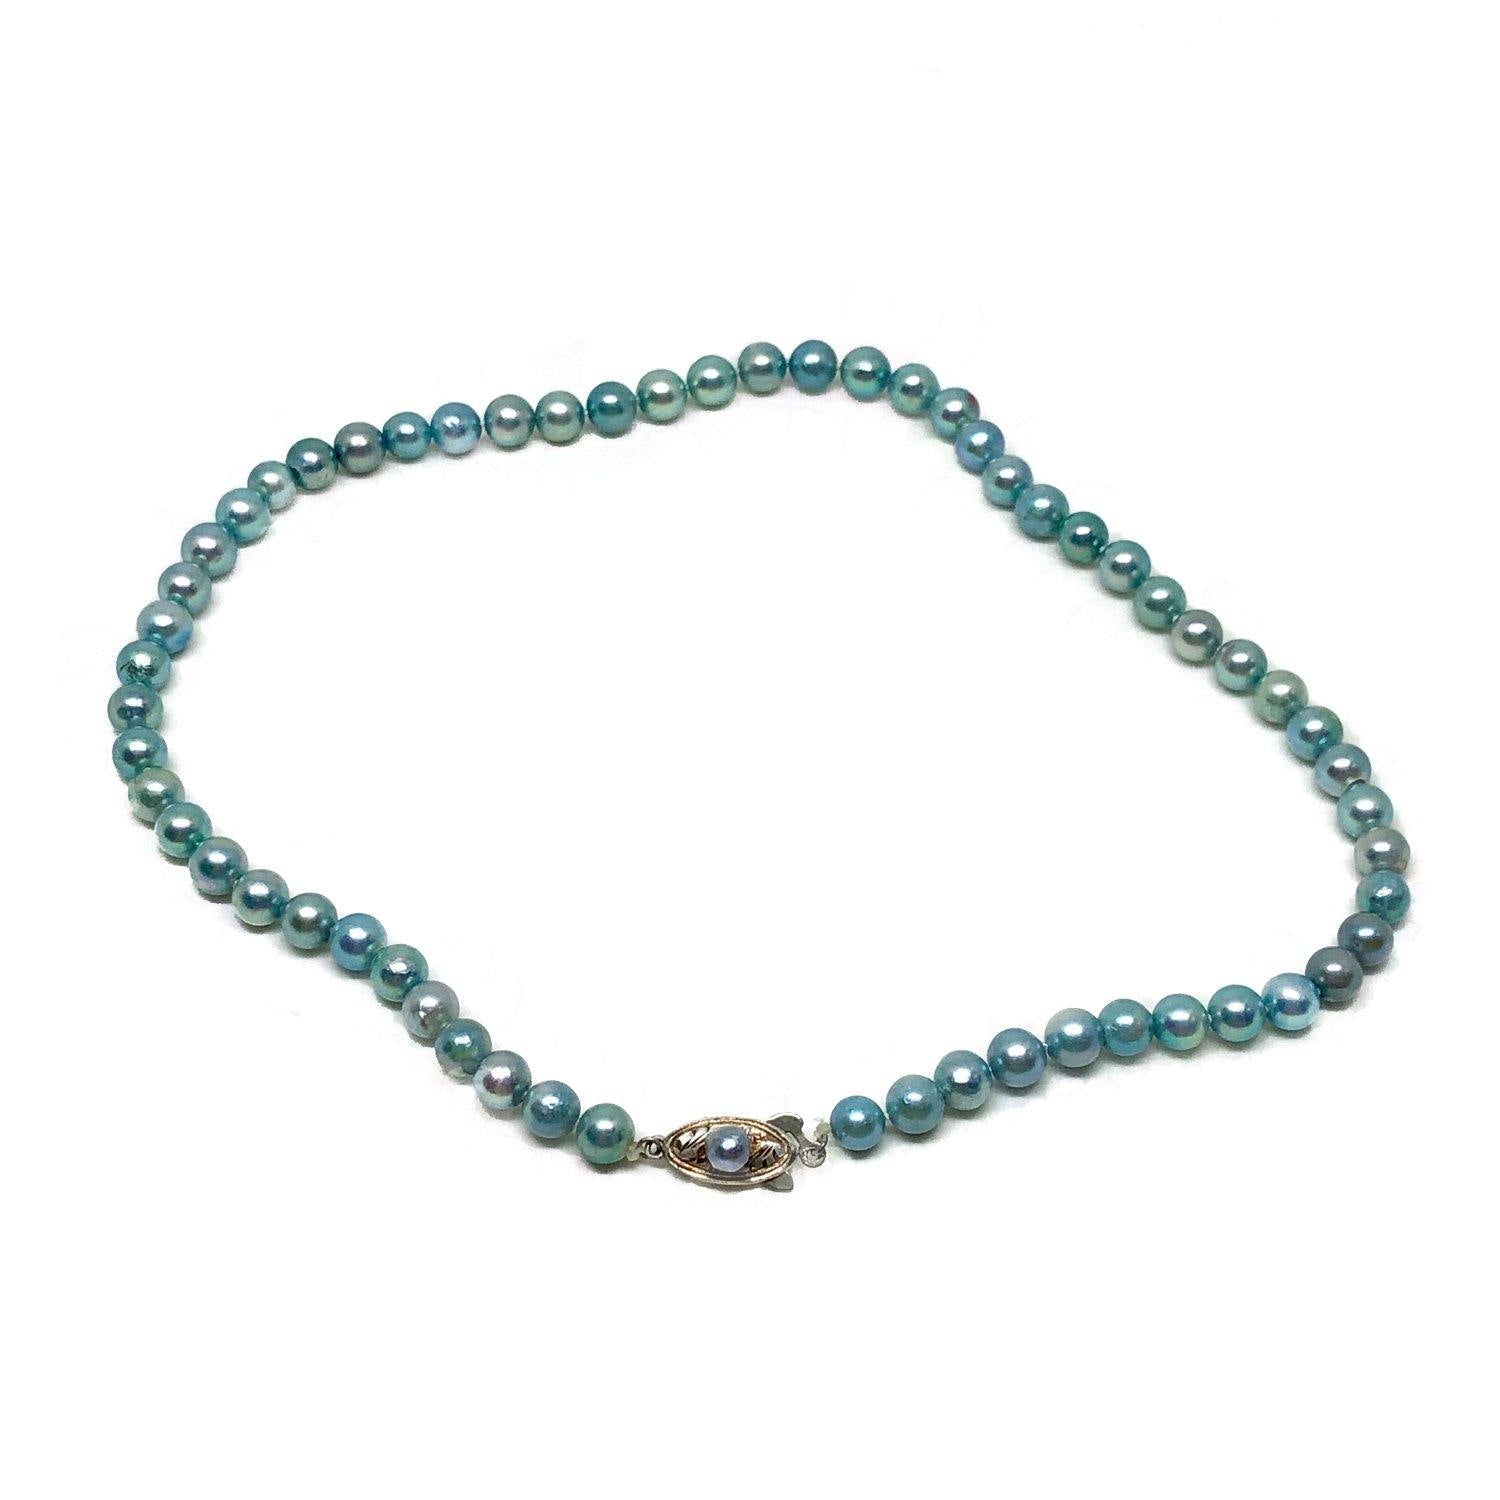 Blue Japanese Saltwater Cultured Akoya Pearl Necklace - Sterling Silver